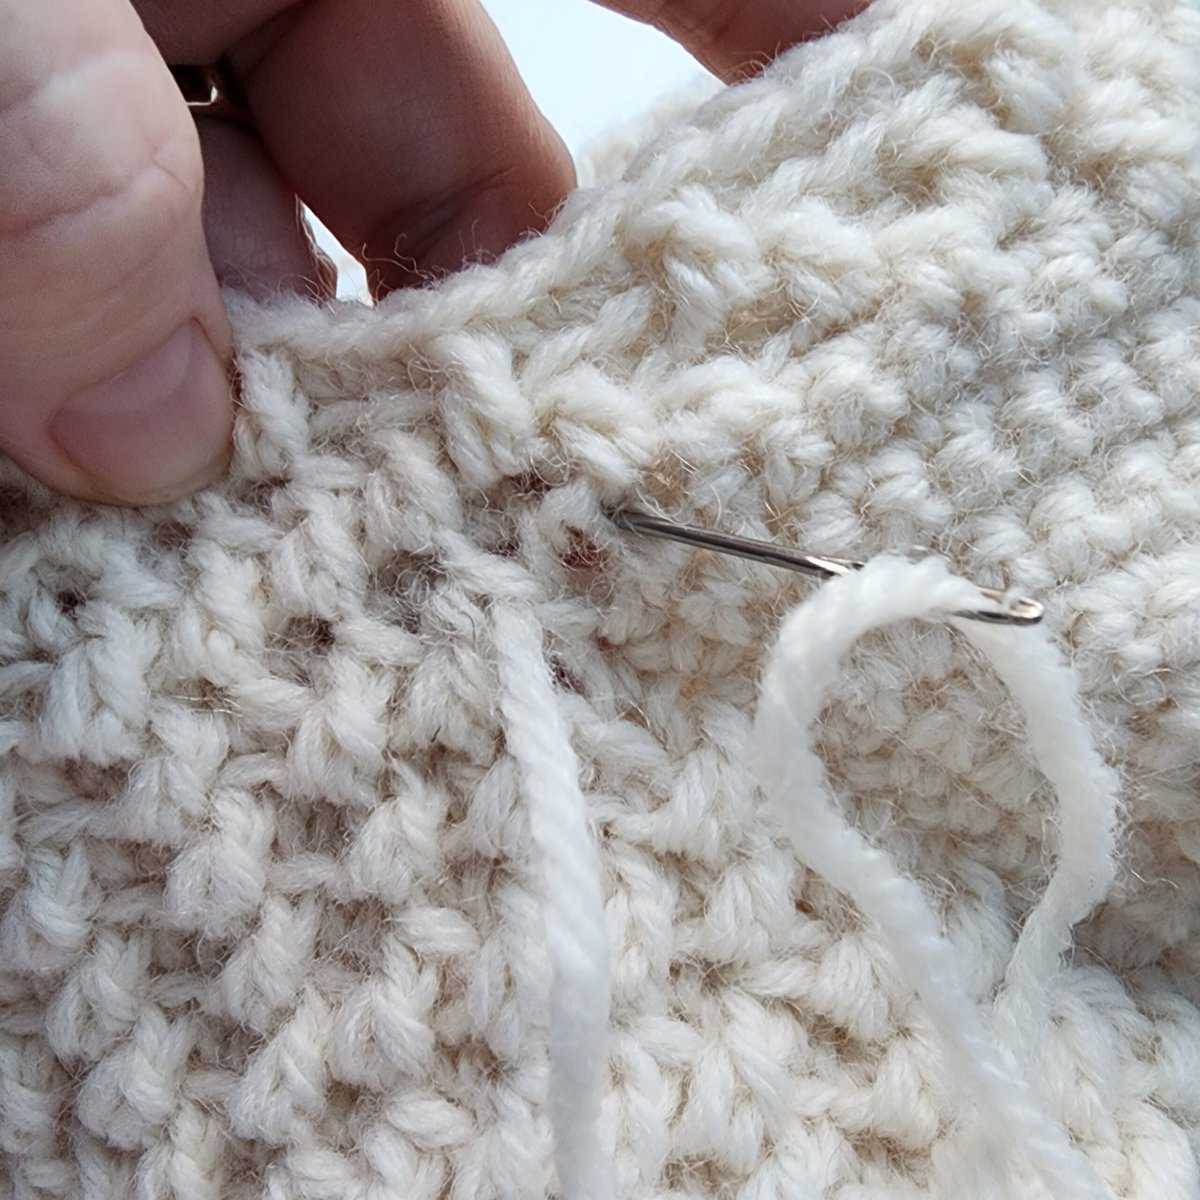 Use a yarn needle to close the gap in the corner of the heel of a stocking.